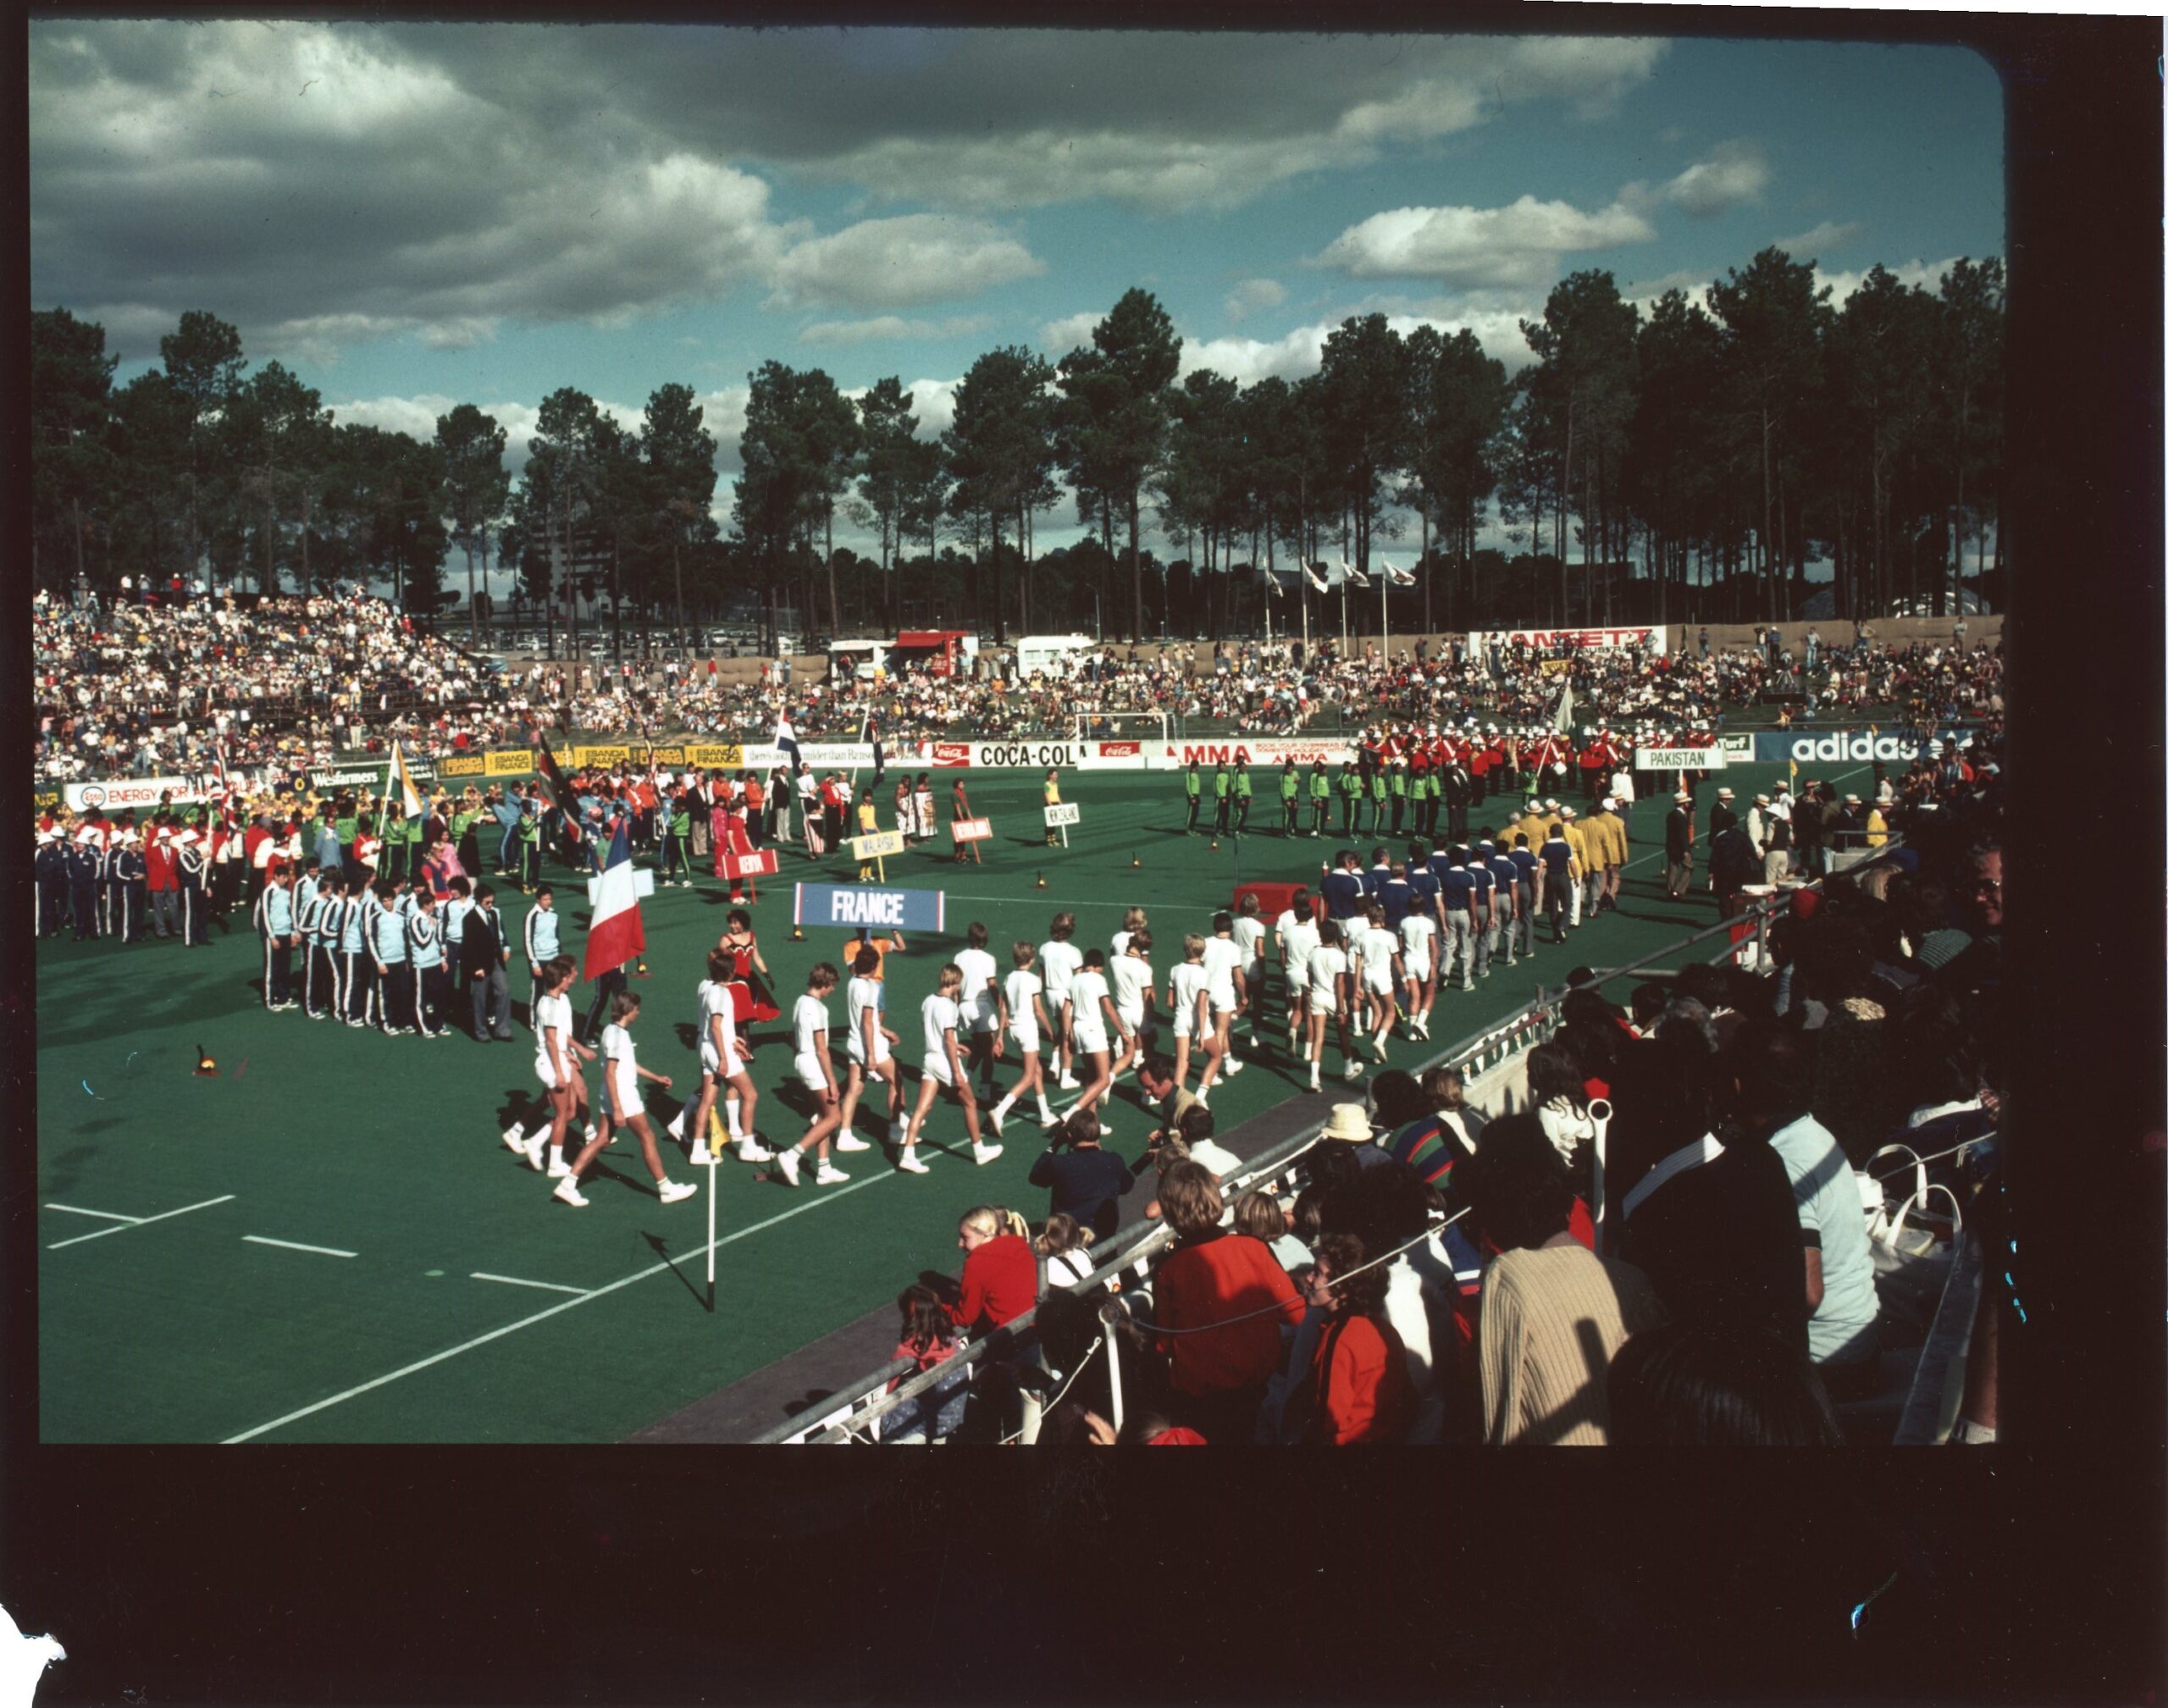 colour photo of a hockey field with groups of people in processions carrying names of countries they are from: france and pakistan can be read. there are spectators all around the field.